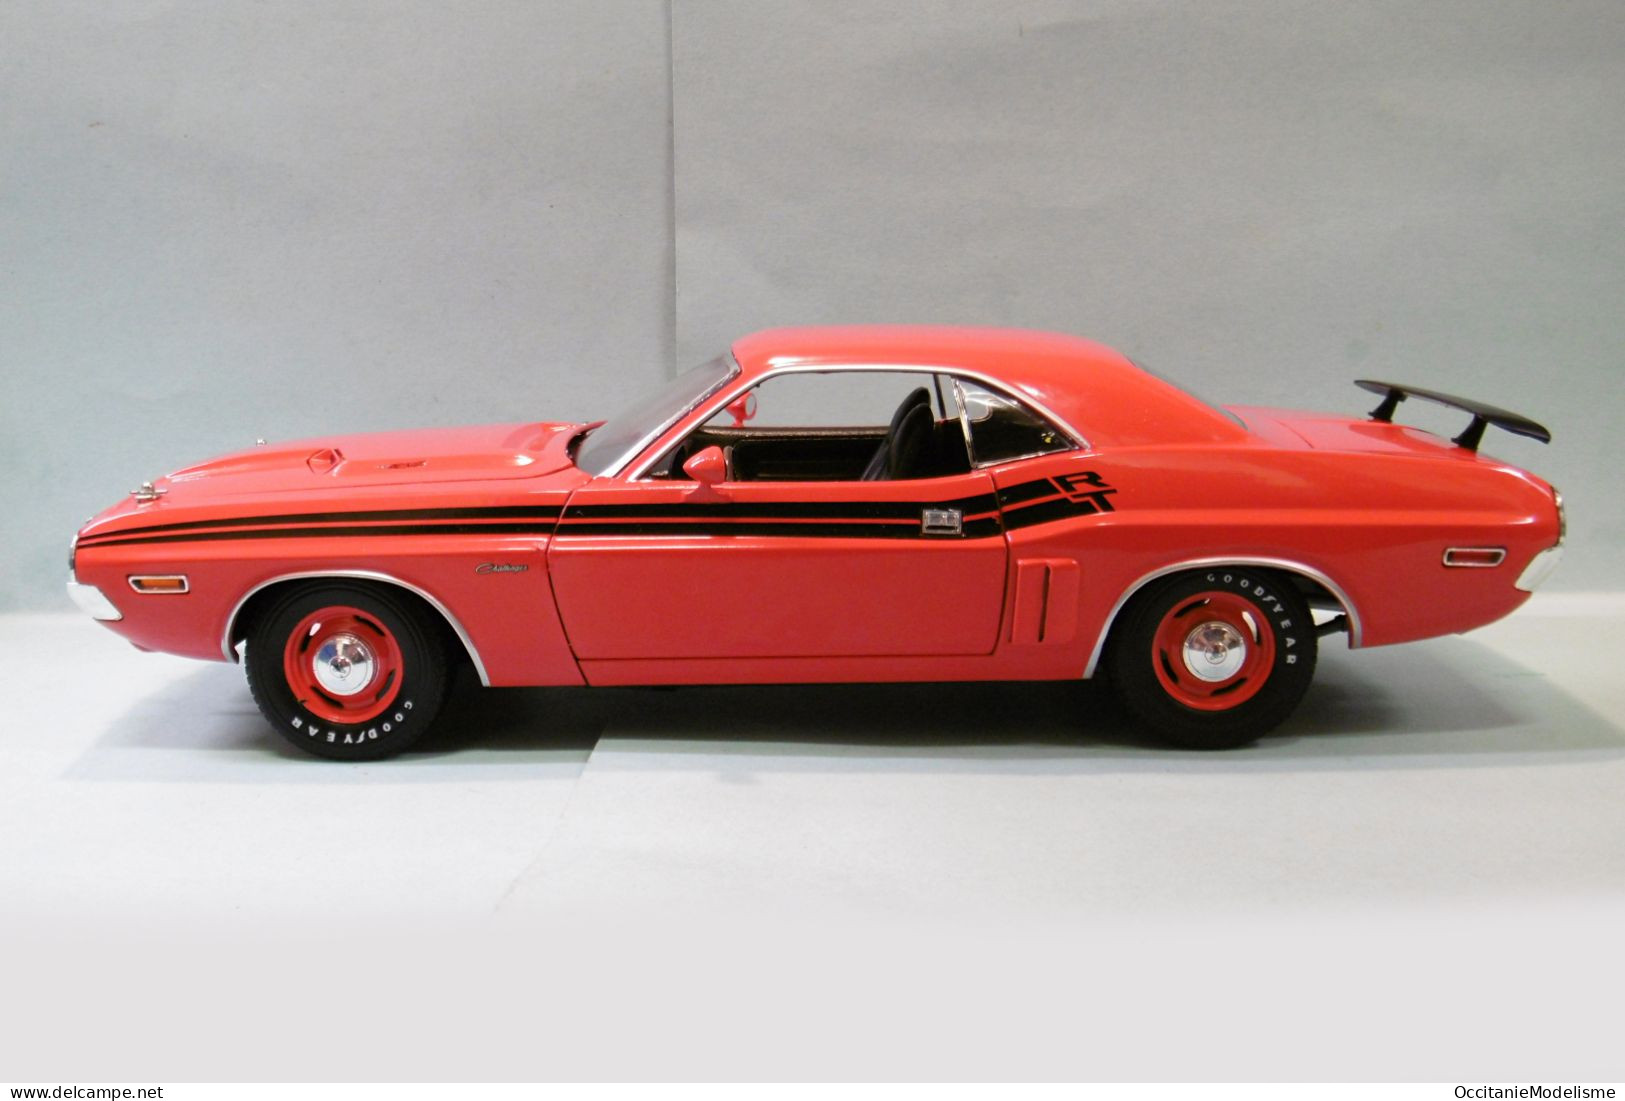 Greenlight - DODGE CHALLENGER R/T 1971 rouge réf. 13631 Neuf 1/18